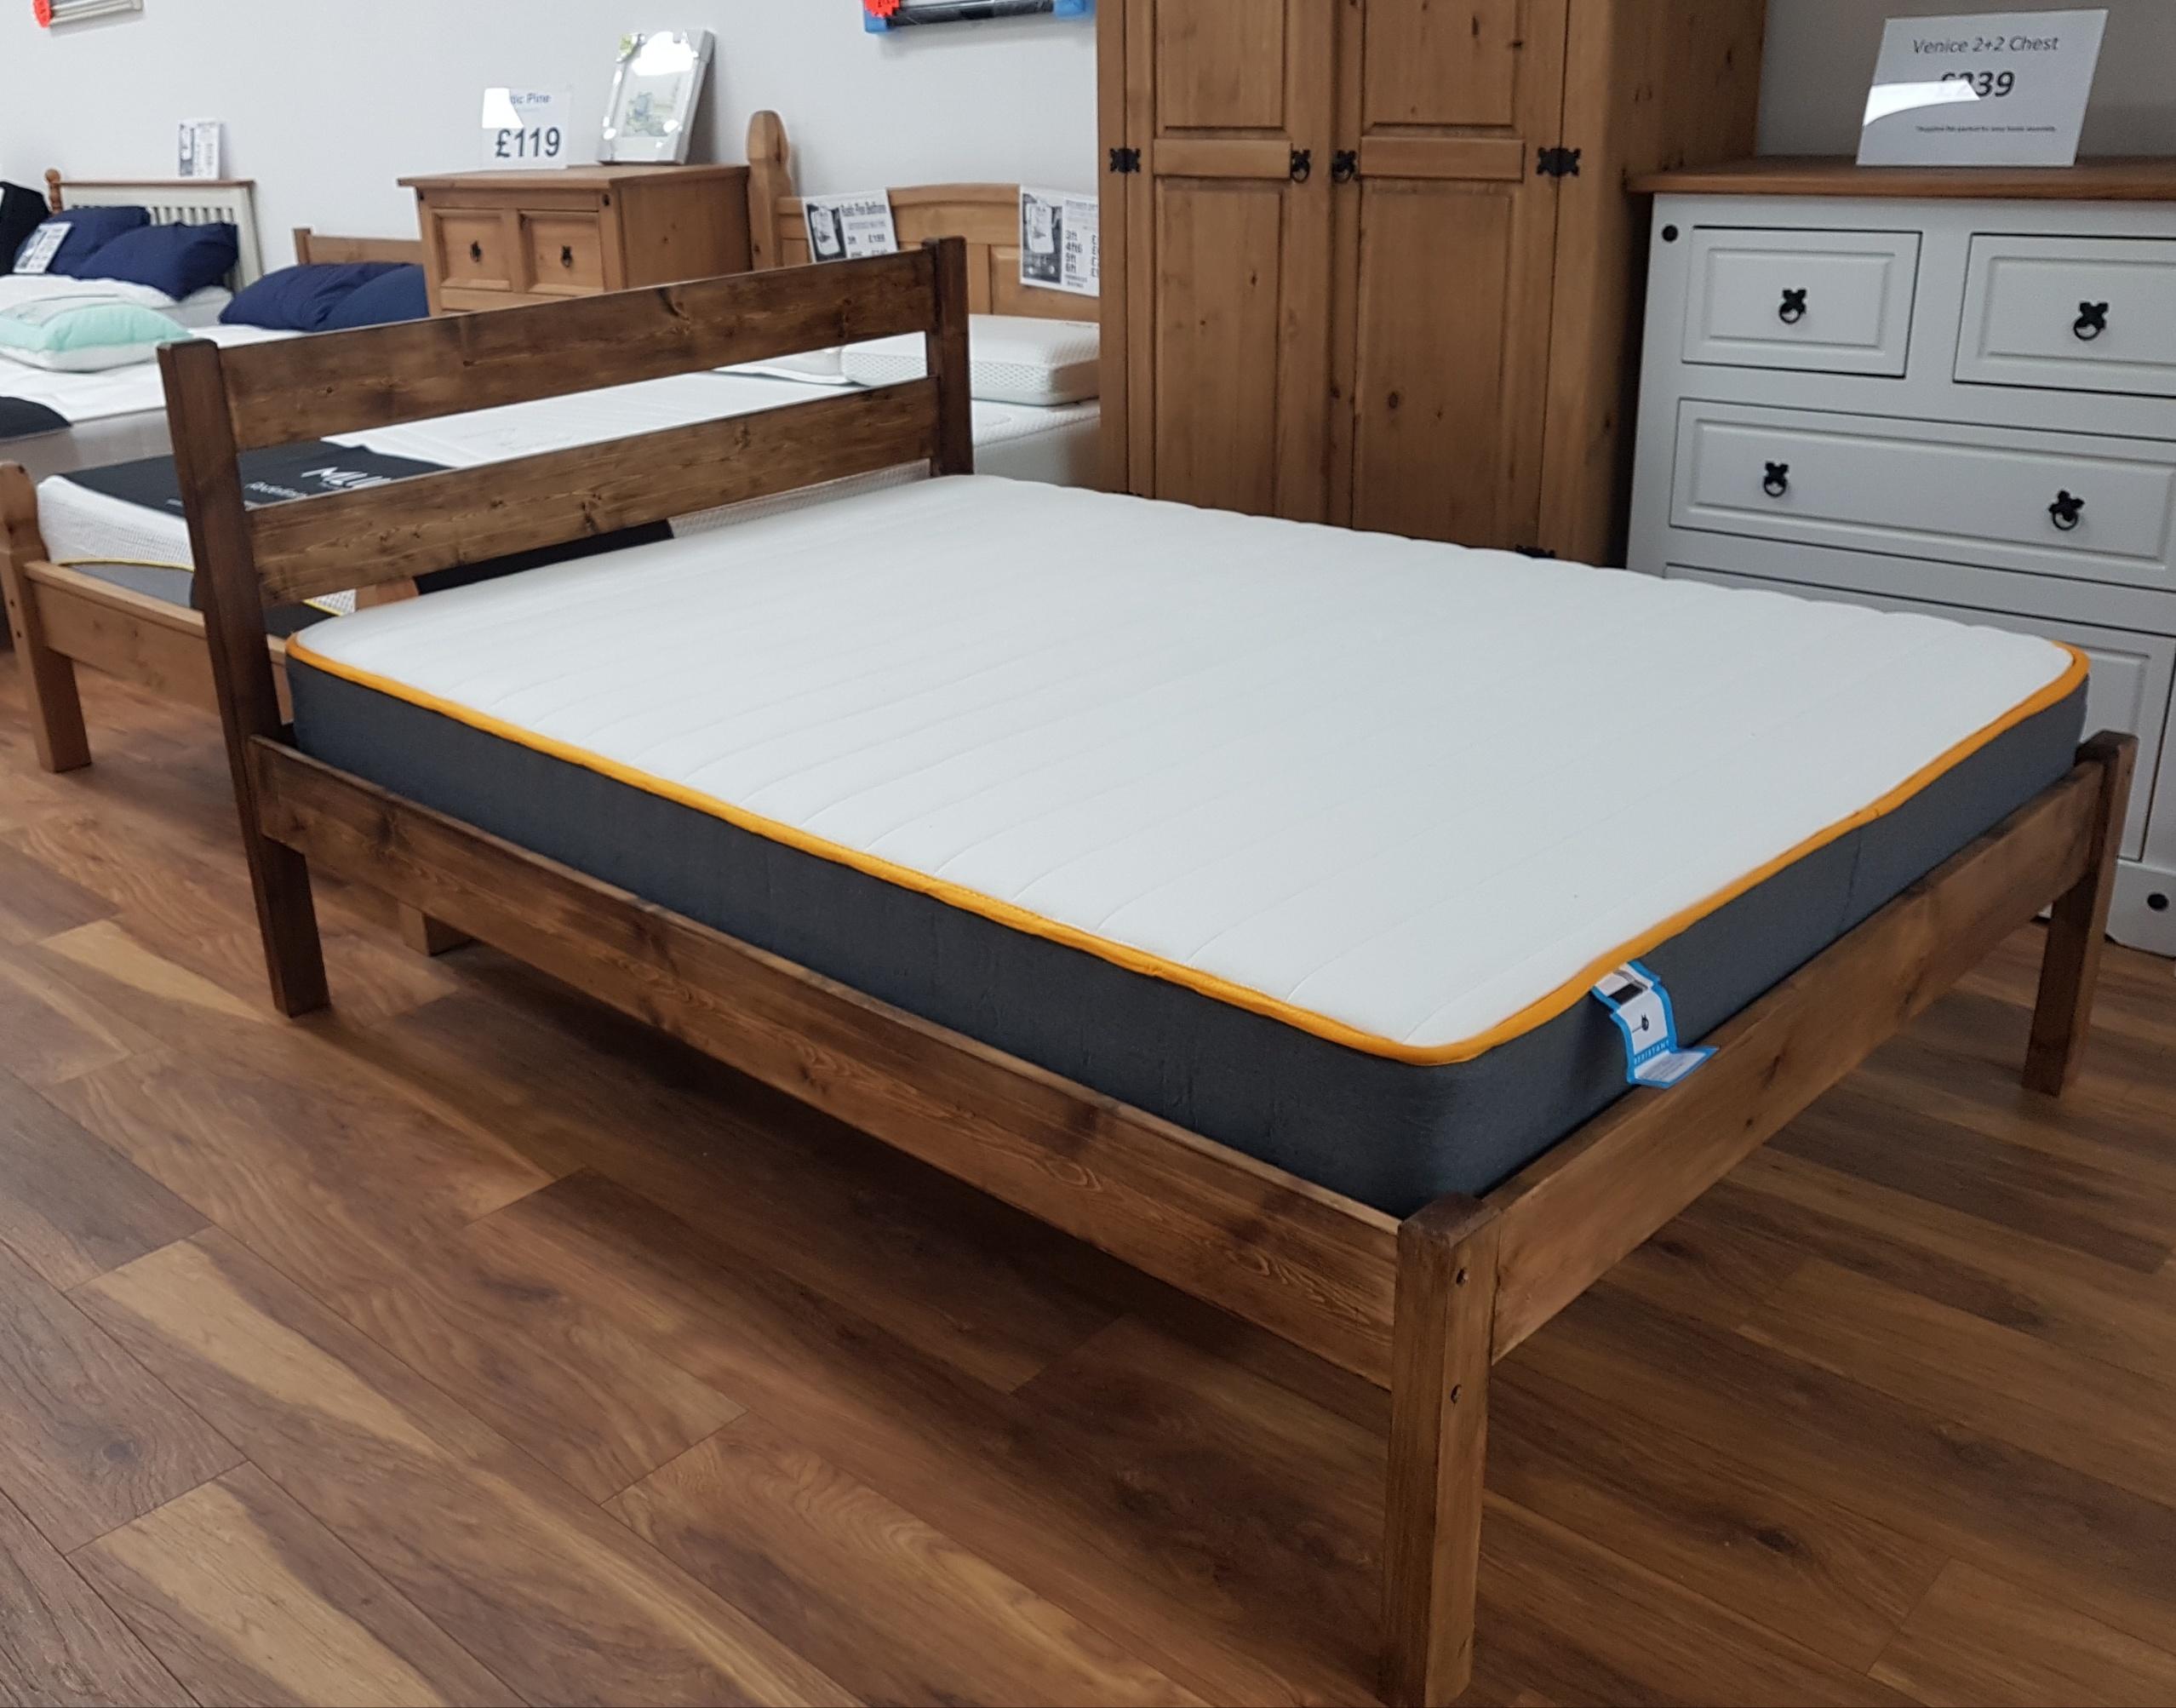 Lisa bed frame and Birlea mattress in the shop